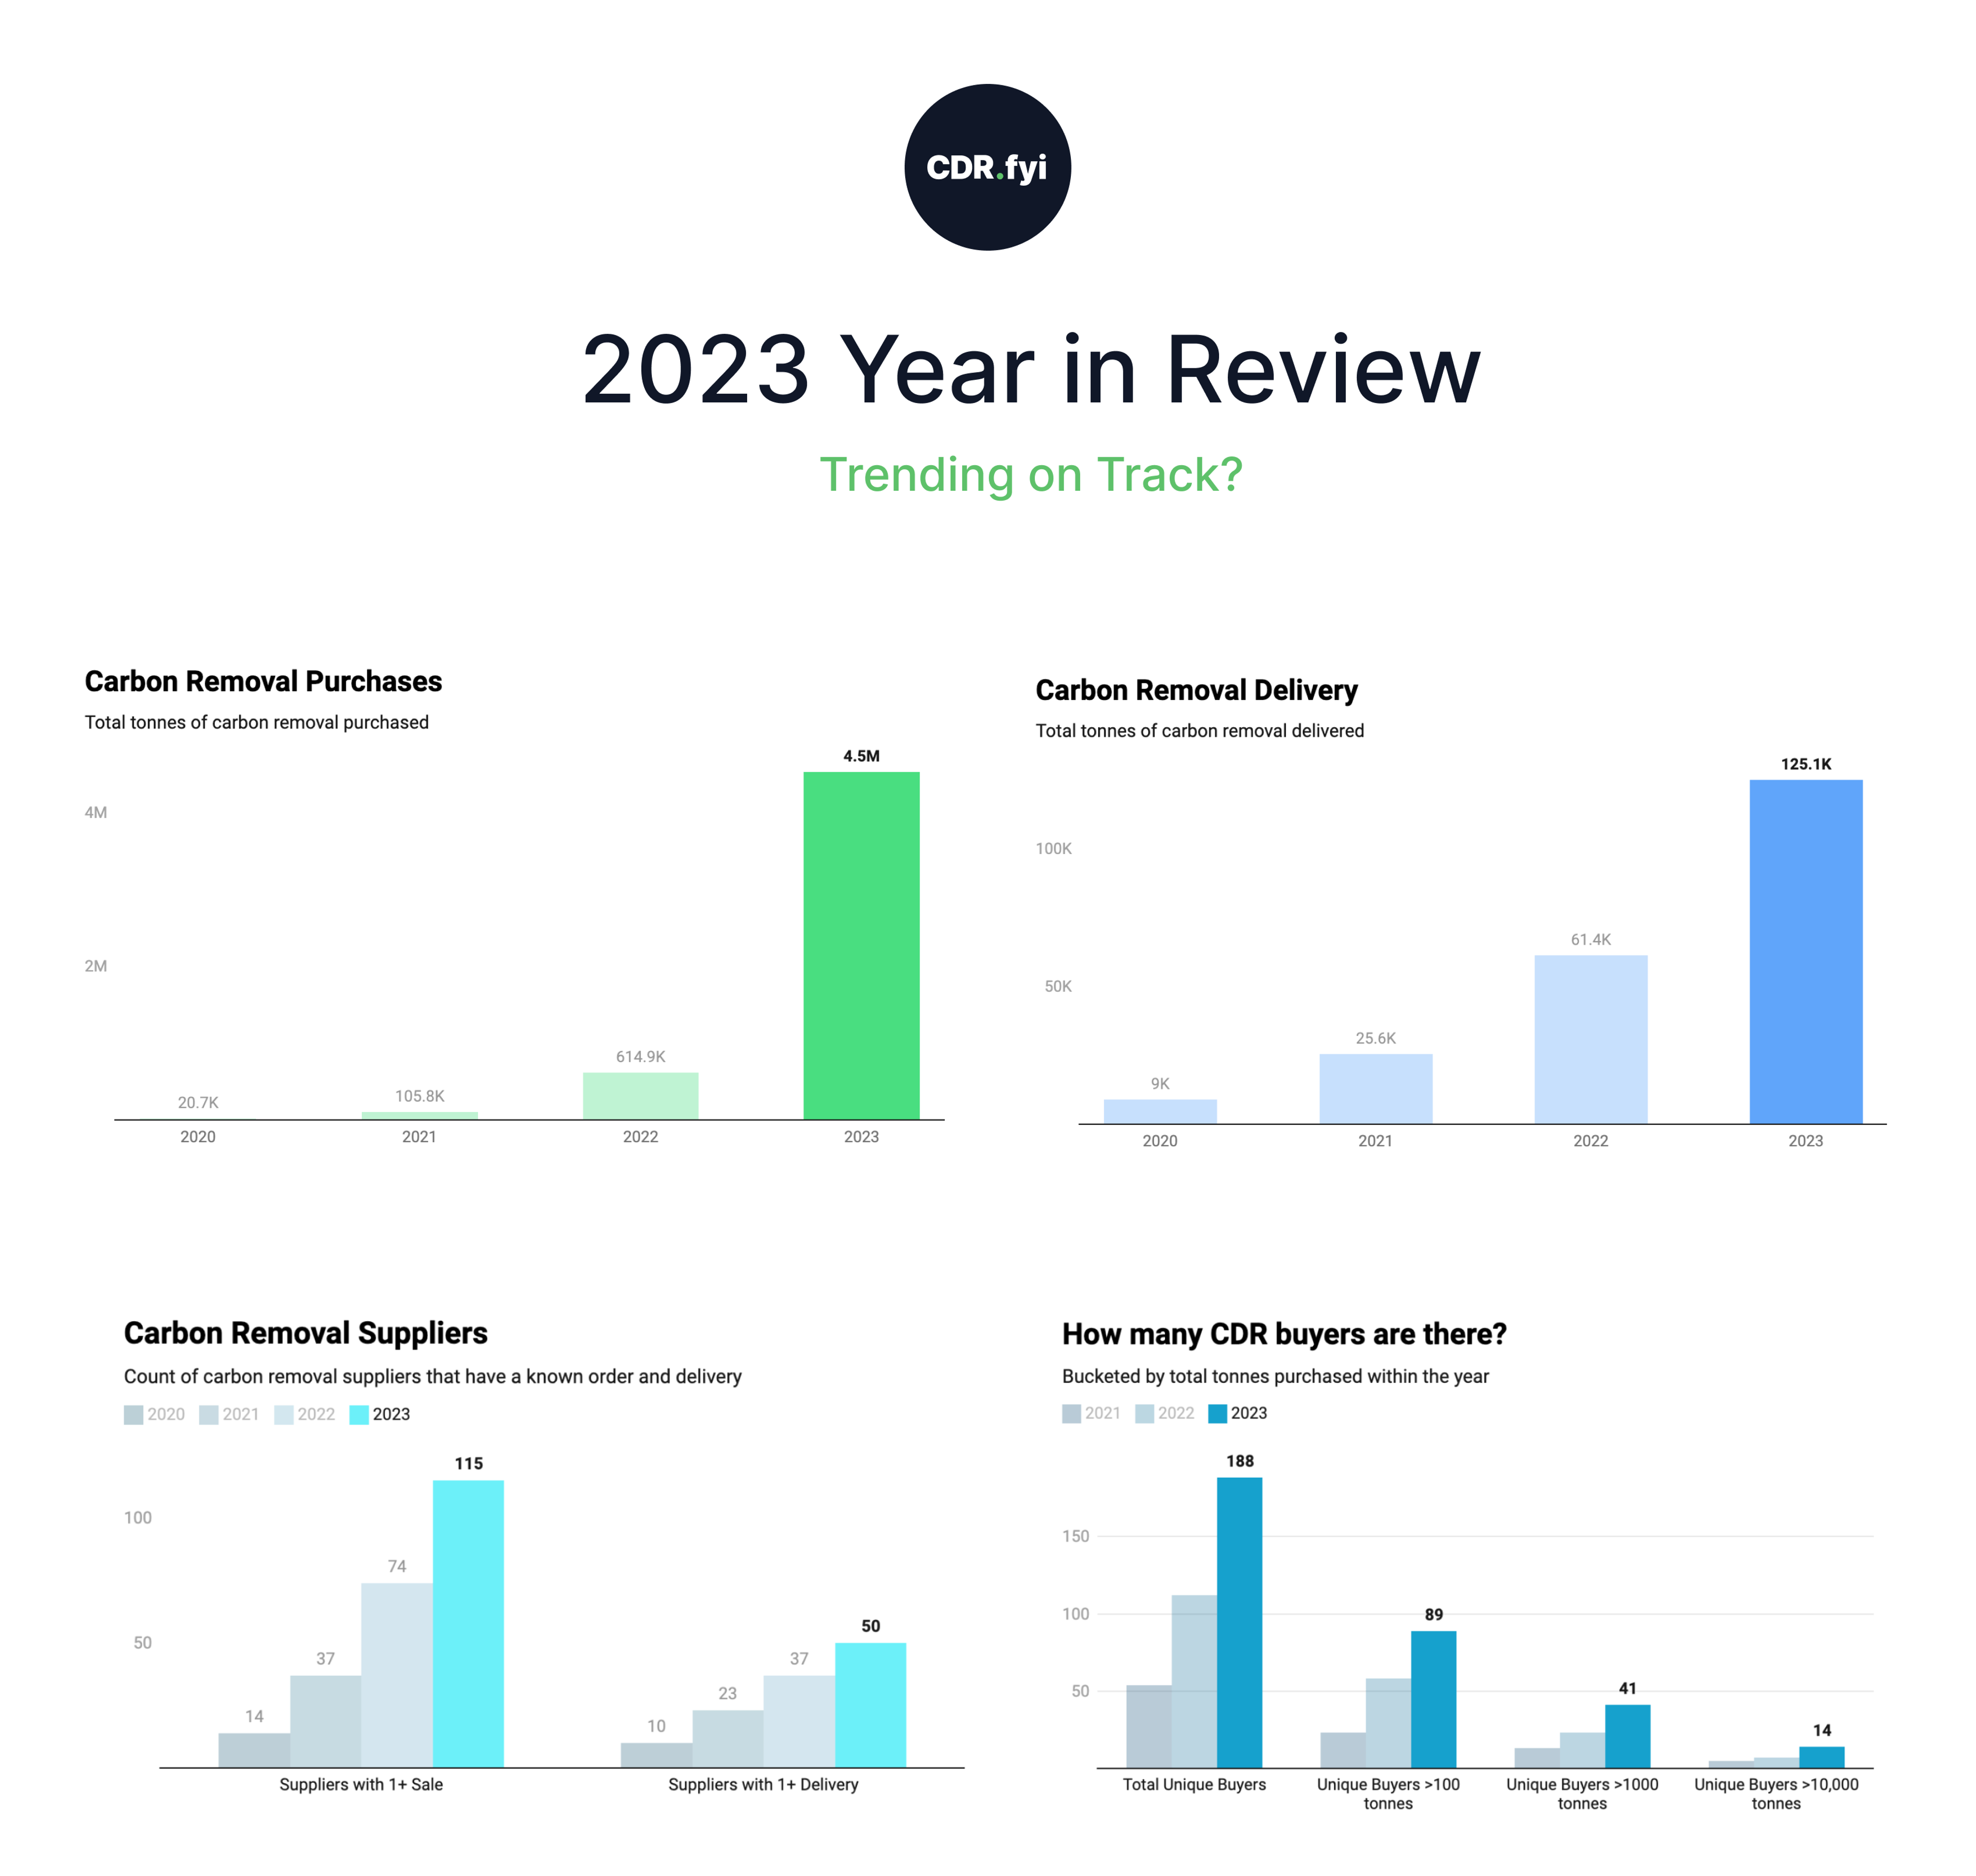 Trending on Track? - CDR.fyi 2023 Year in Review blog post image